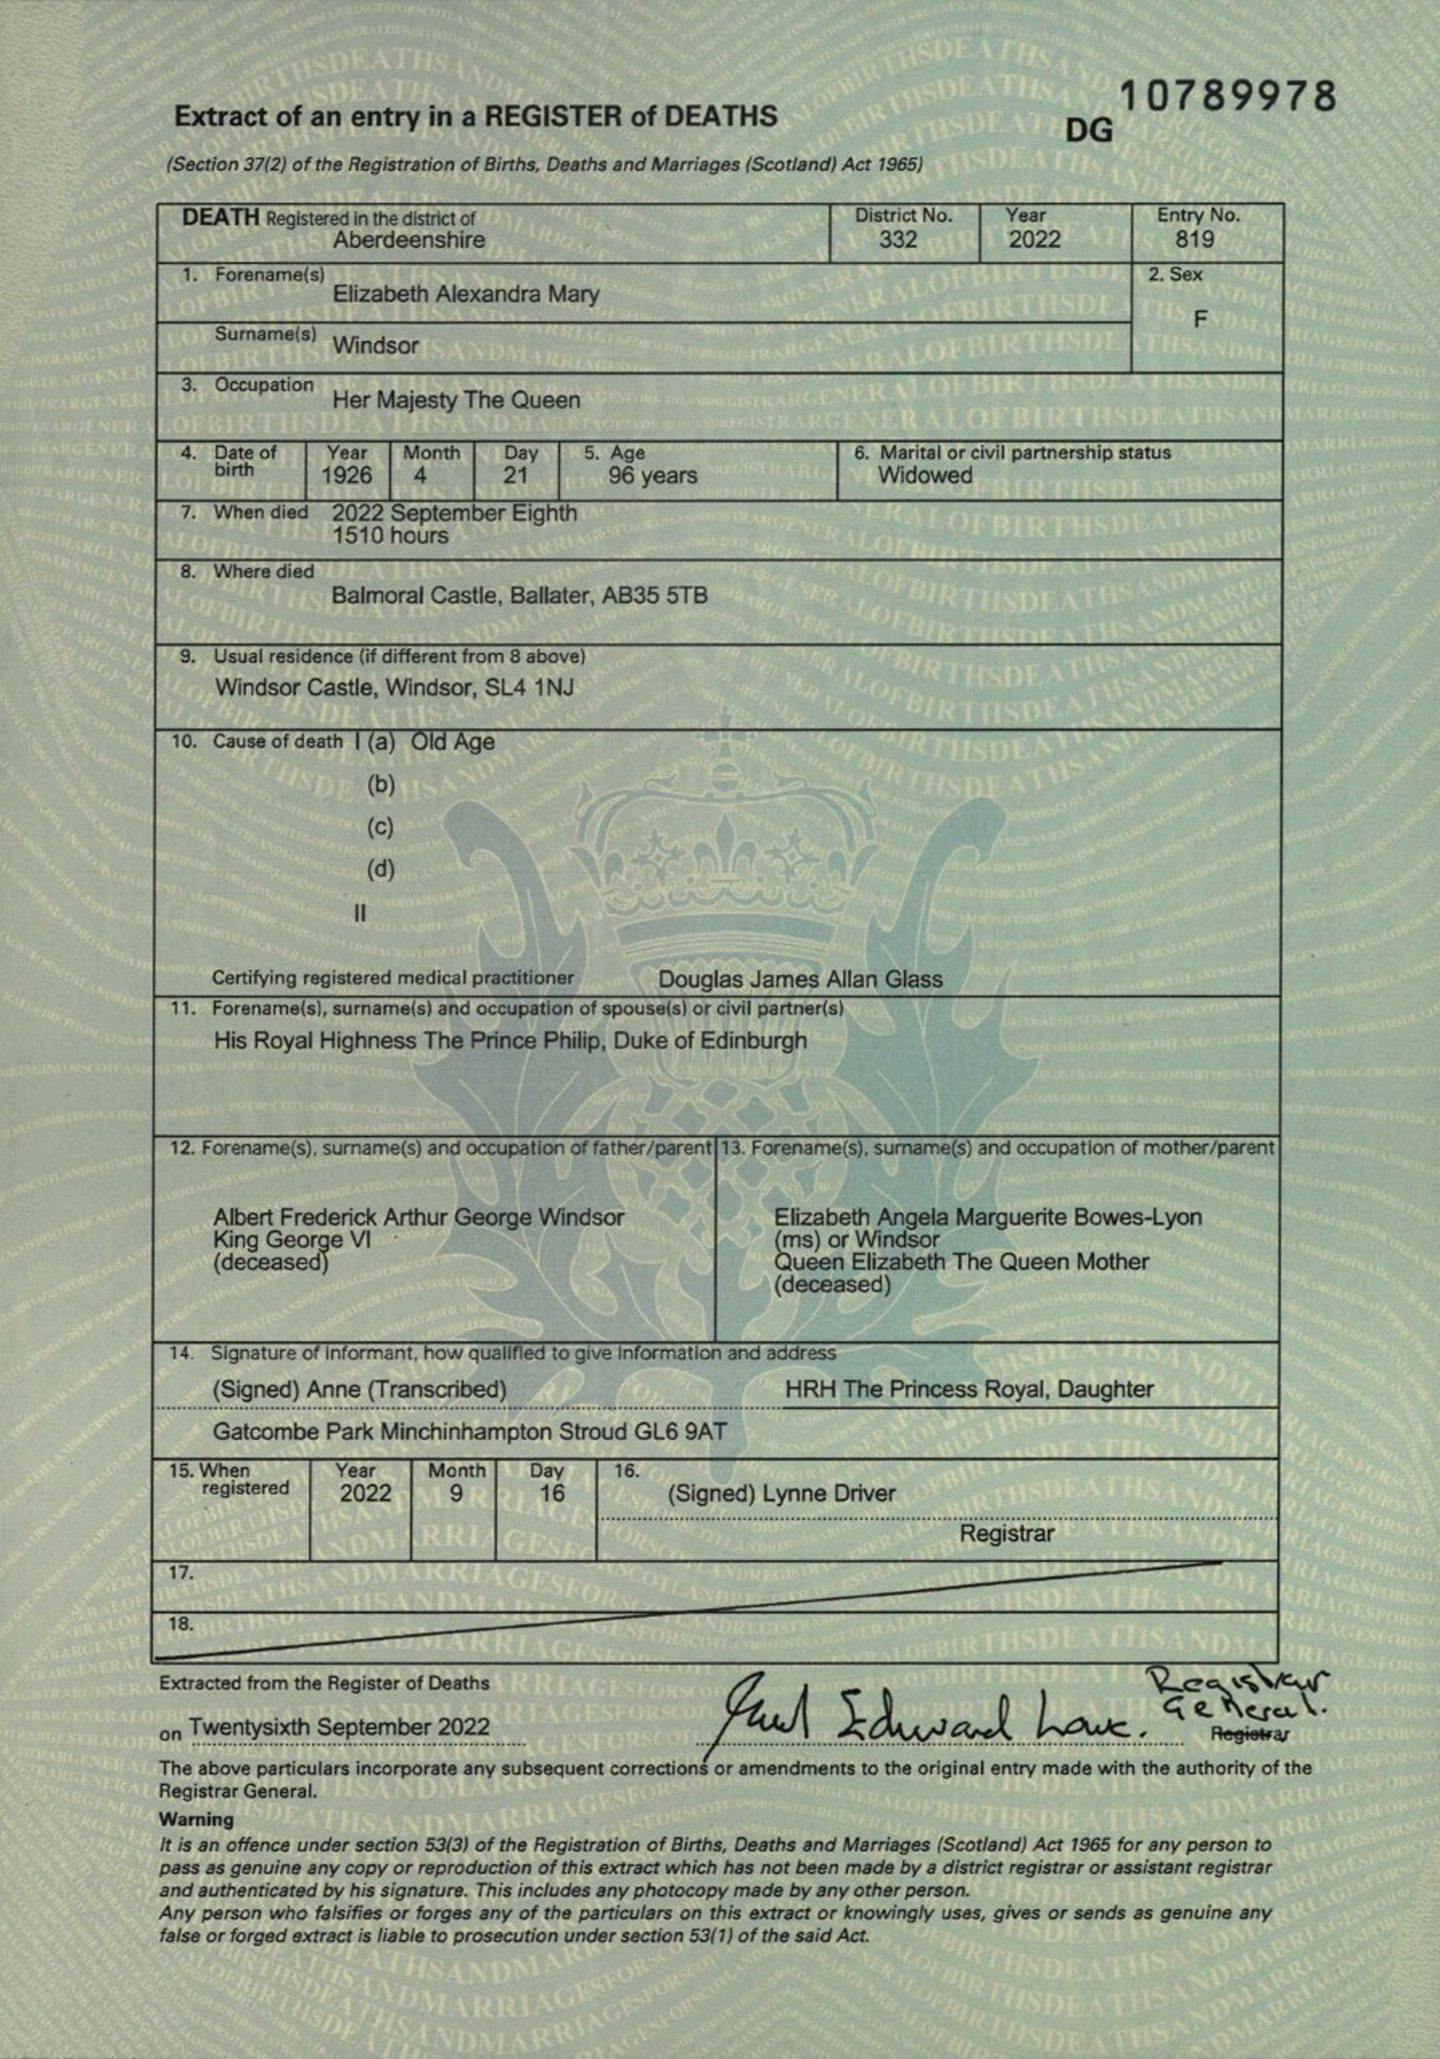 Scanned image of Queen's full death certificate